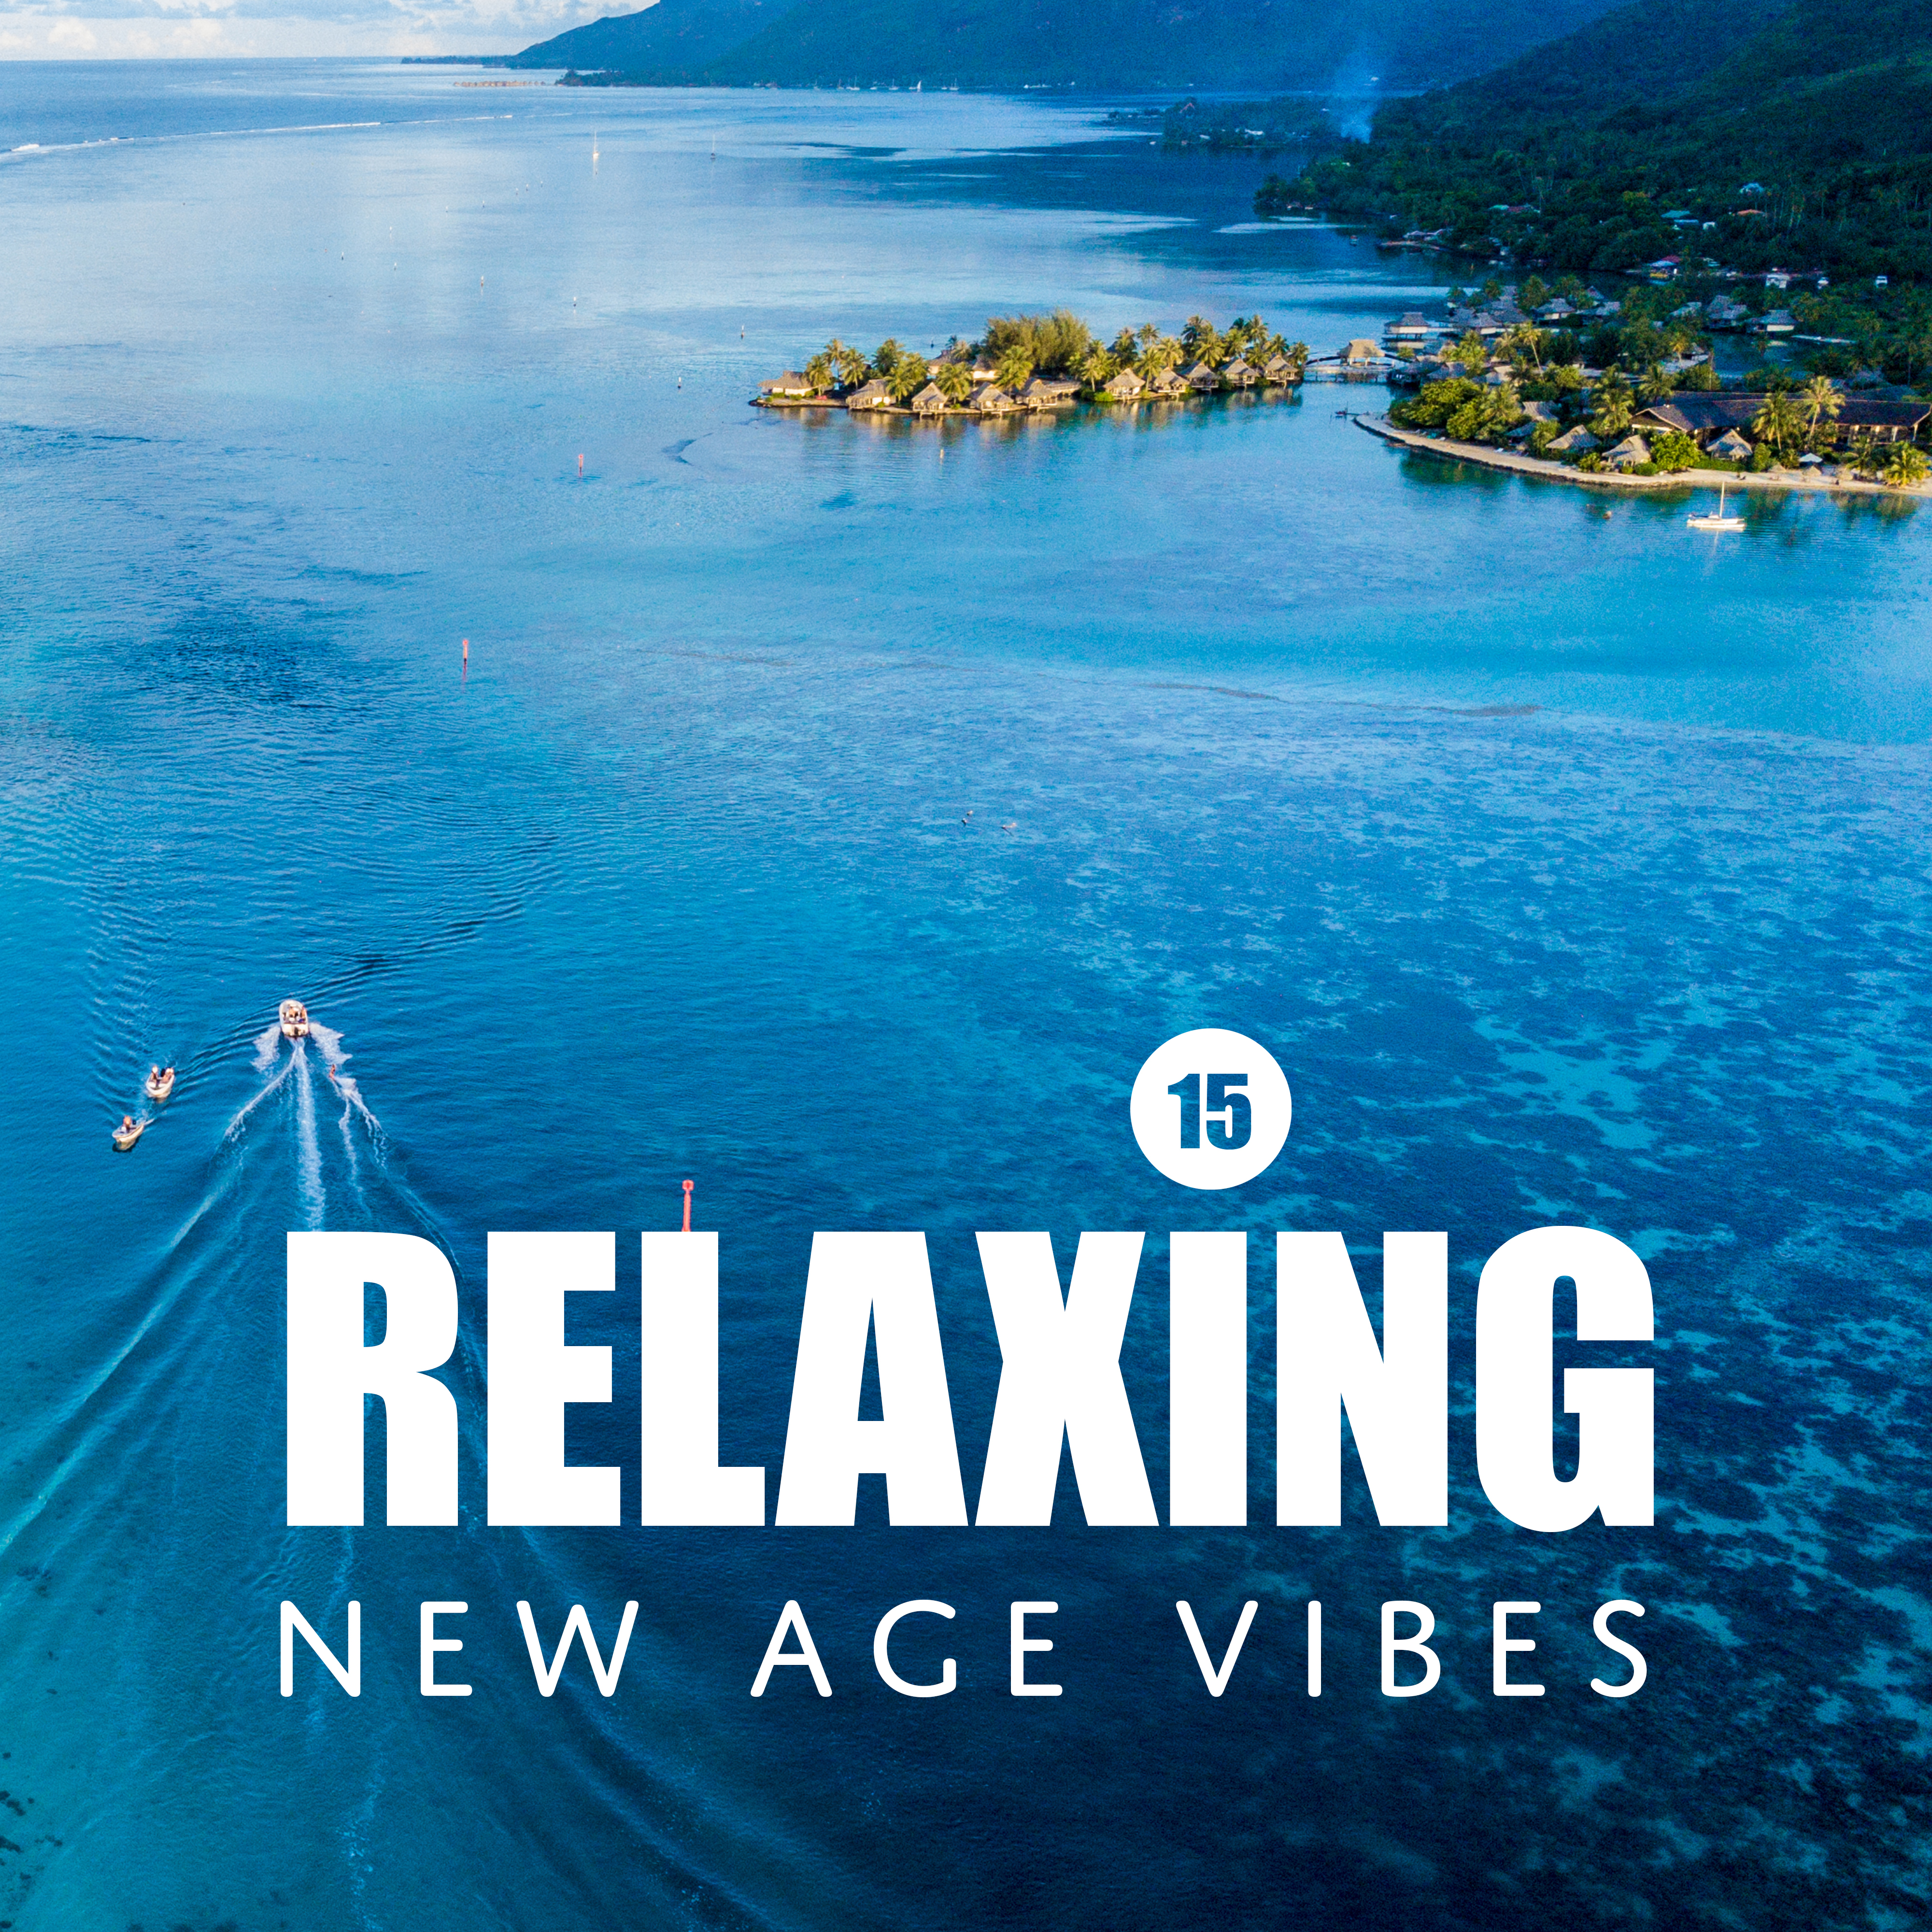 15 Relaxing New Age Vibes